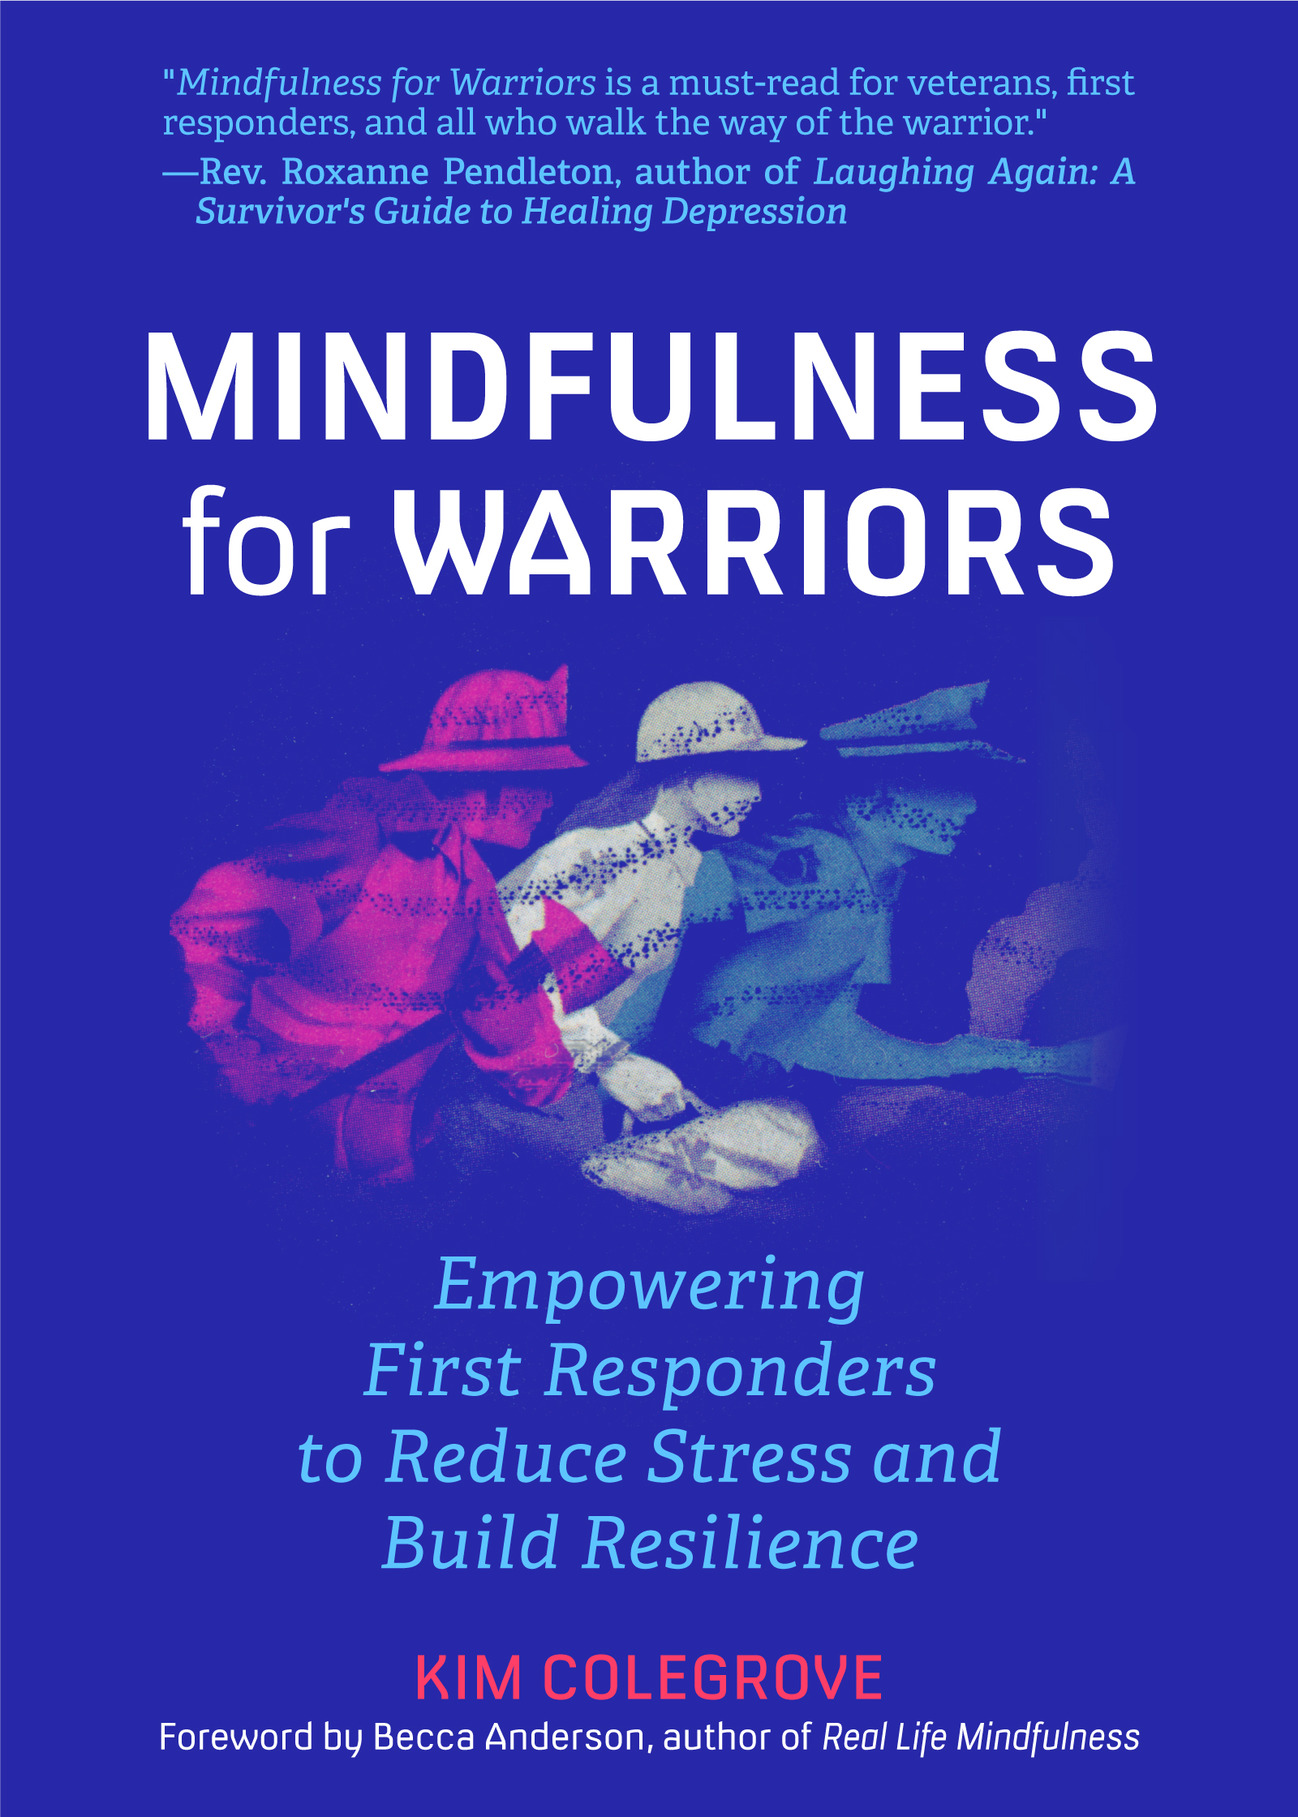 Mindfulness For Warriors. Empowering First Responders to Reduce Stress and Build Resilience